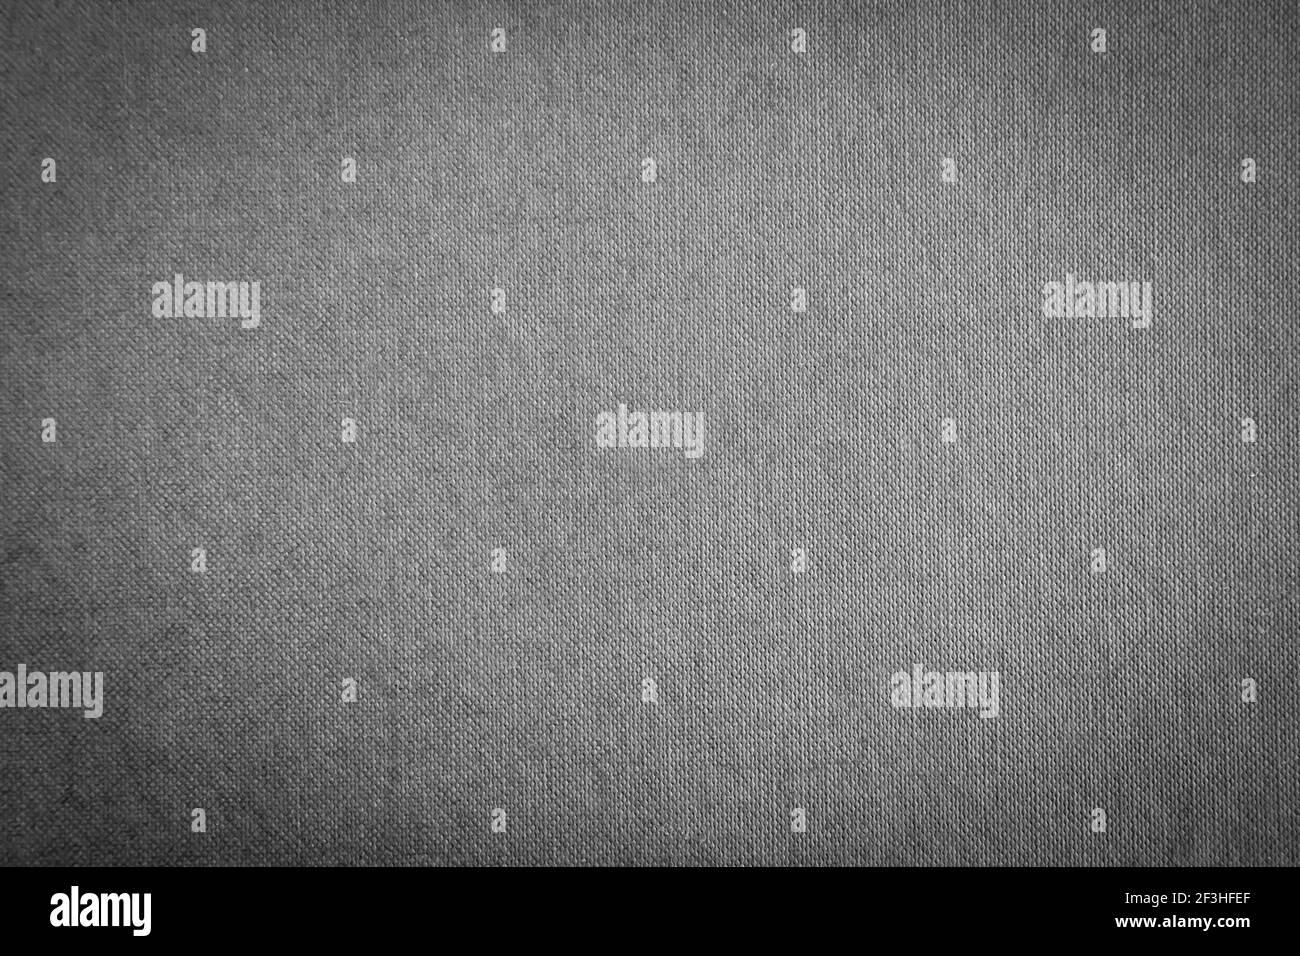 Gray fabric texture as background Stock Photo